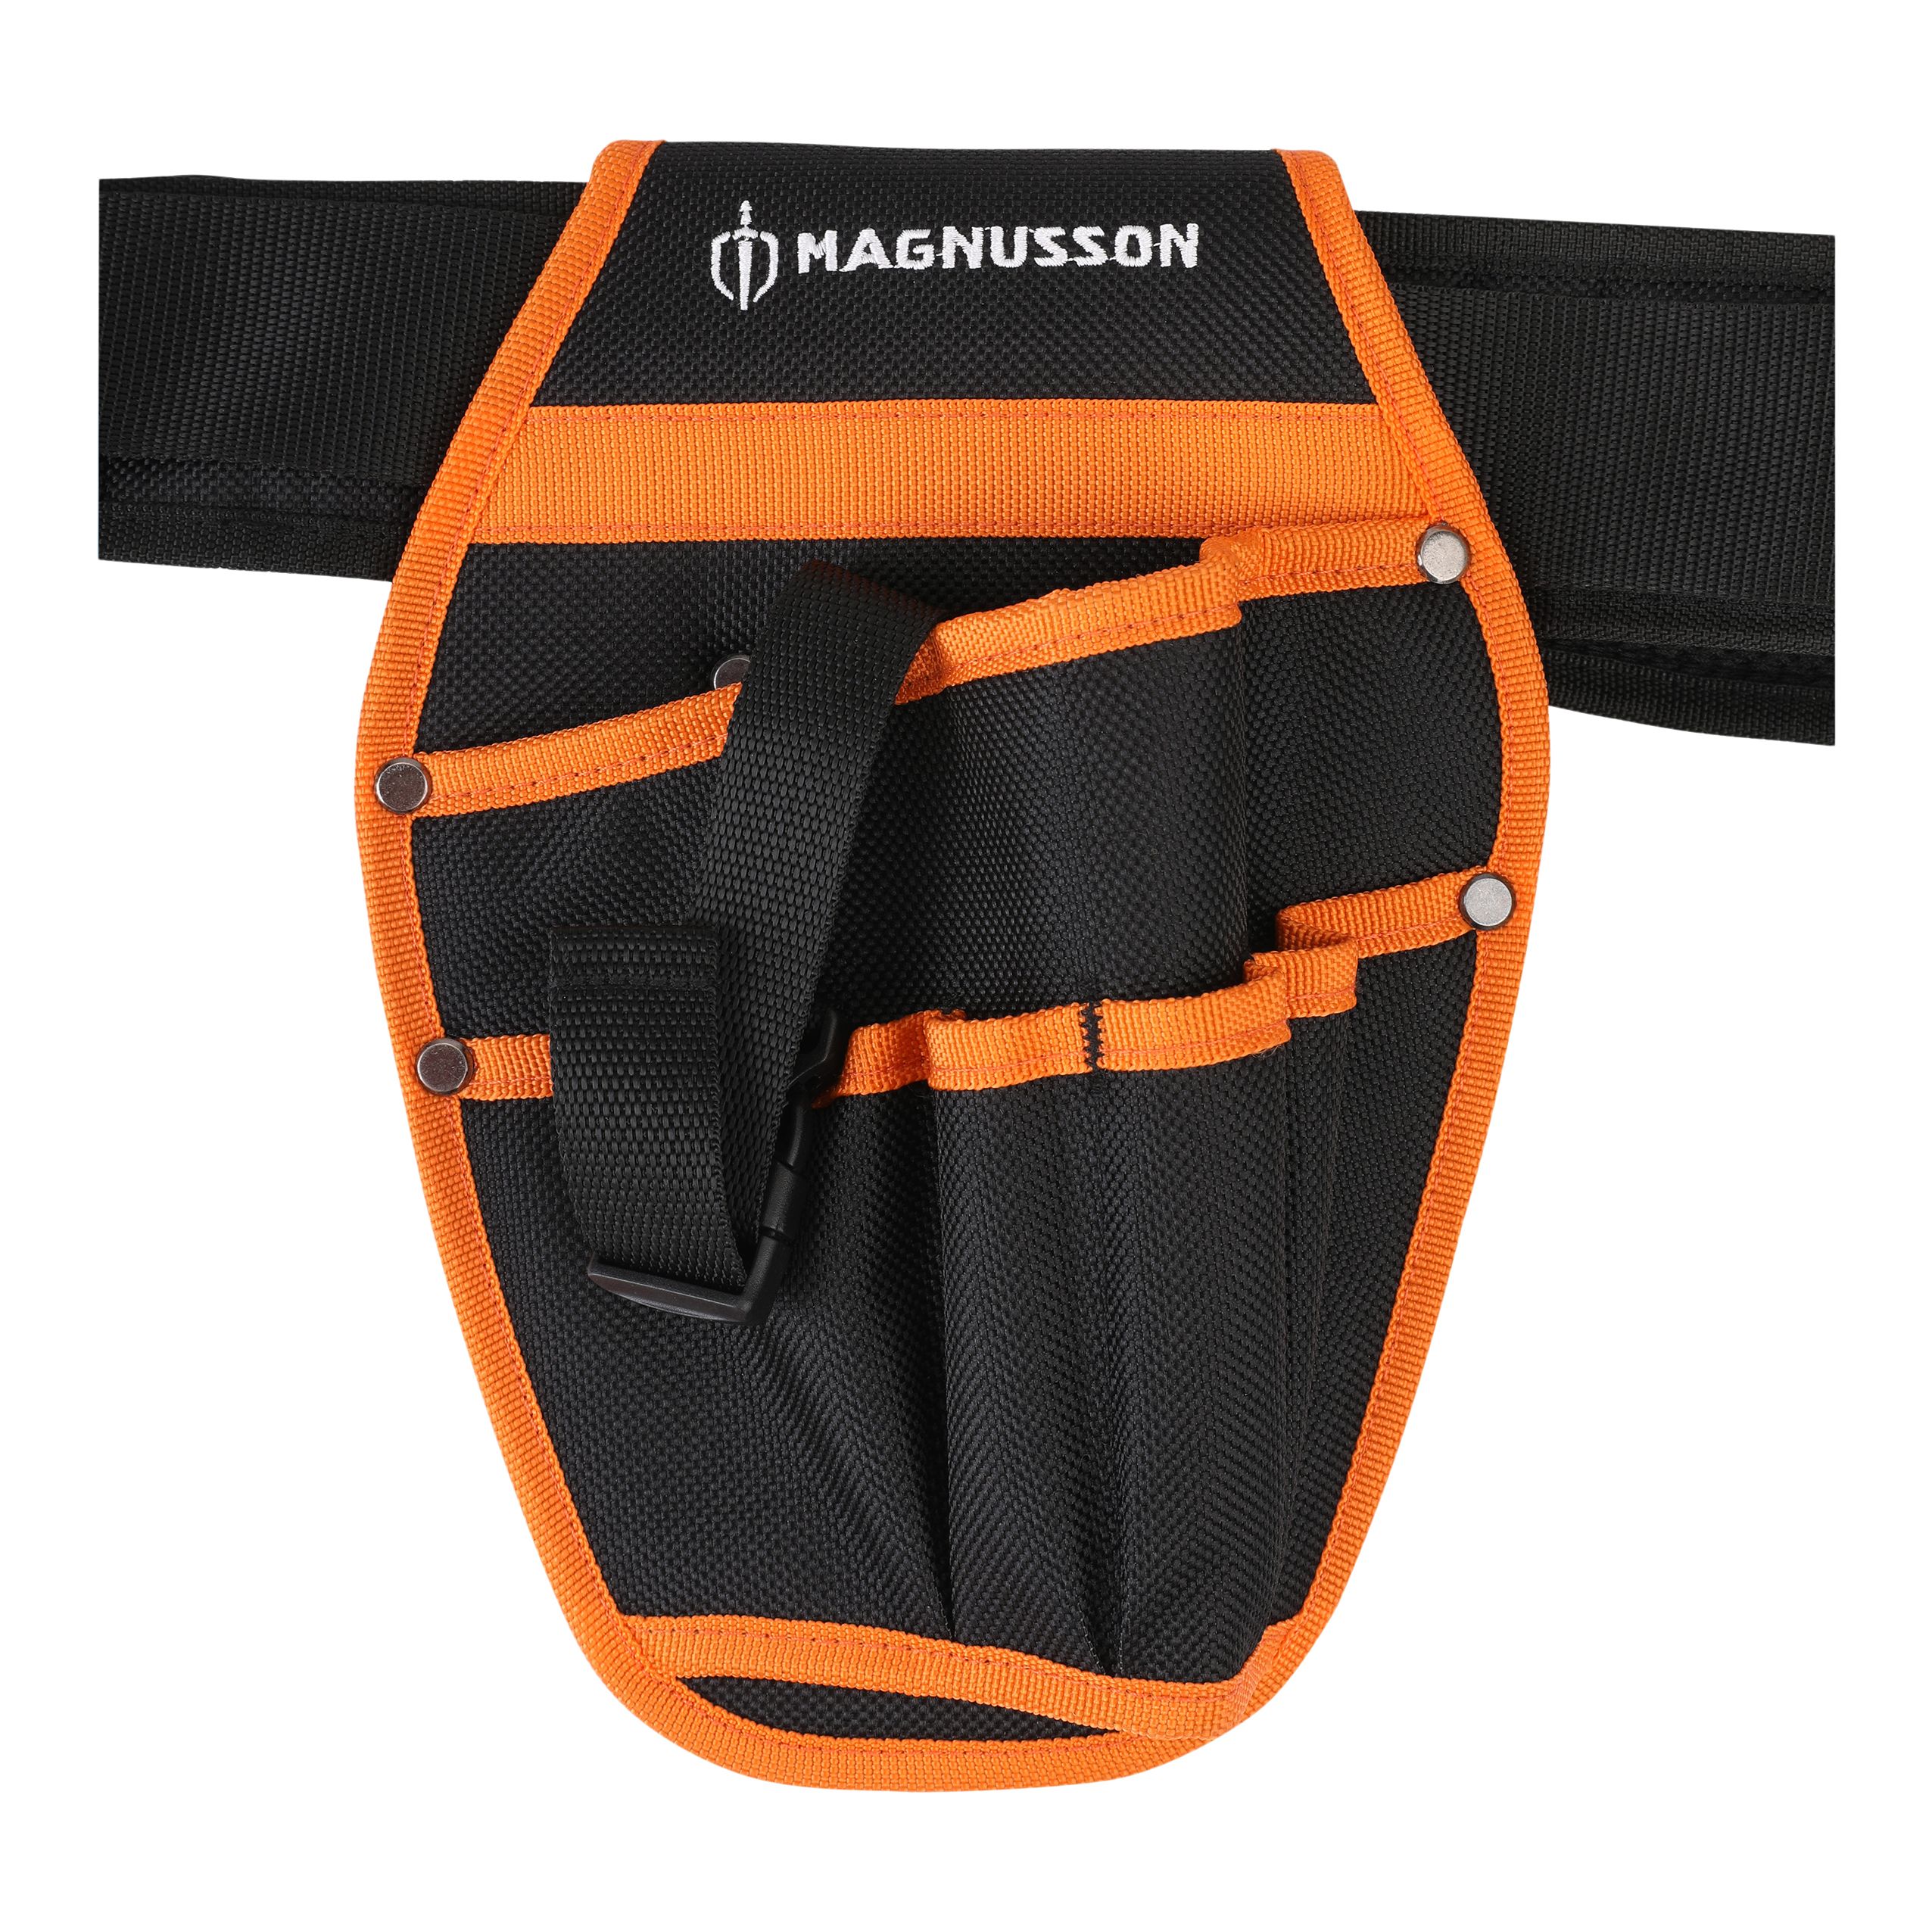 Magnusson Polyester 4 pocket Electrician's pouch, 48"